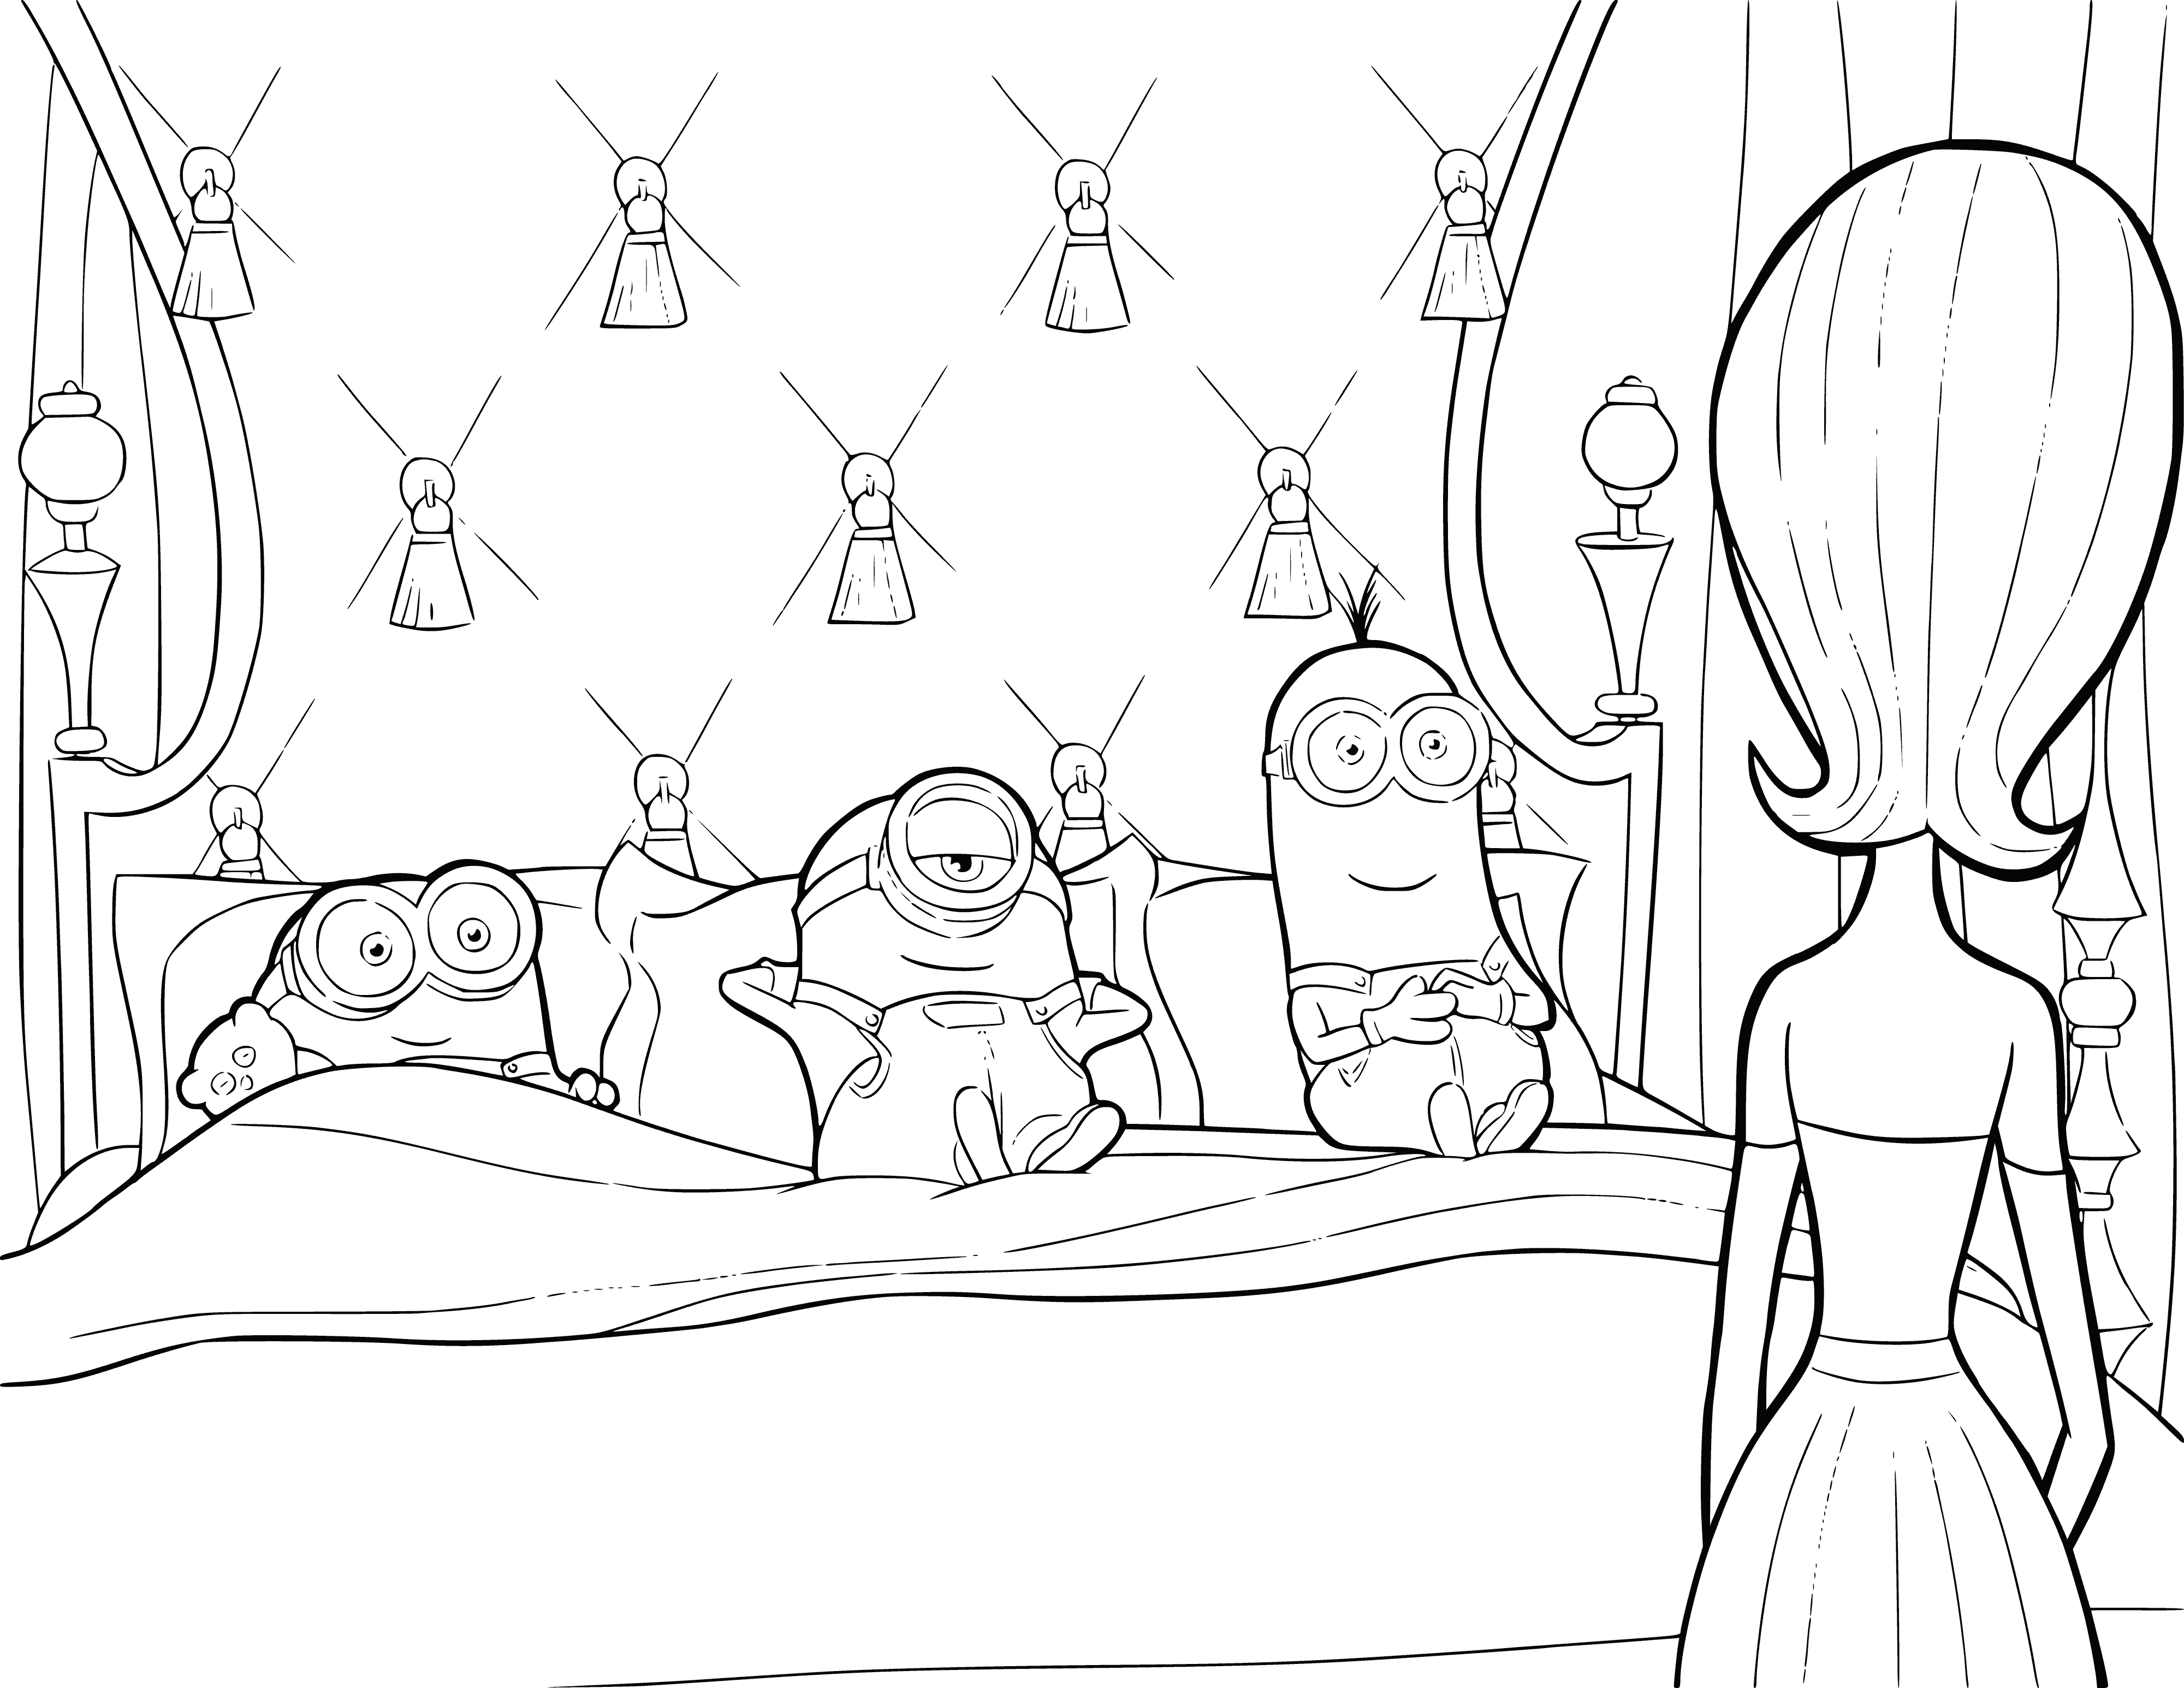 coloring page: 3 sleepy Minions in PJs in a bed: one on back, one on stomach & one on side. #minions #coloringpage #cute